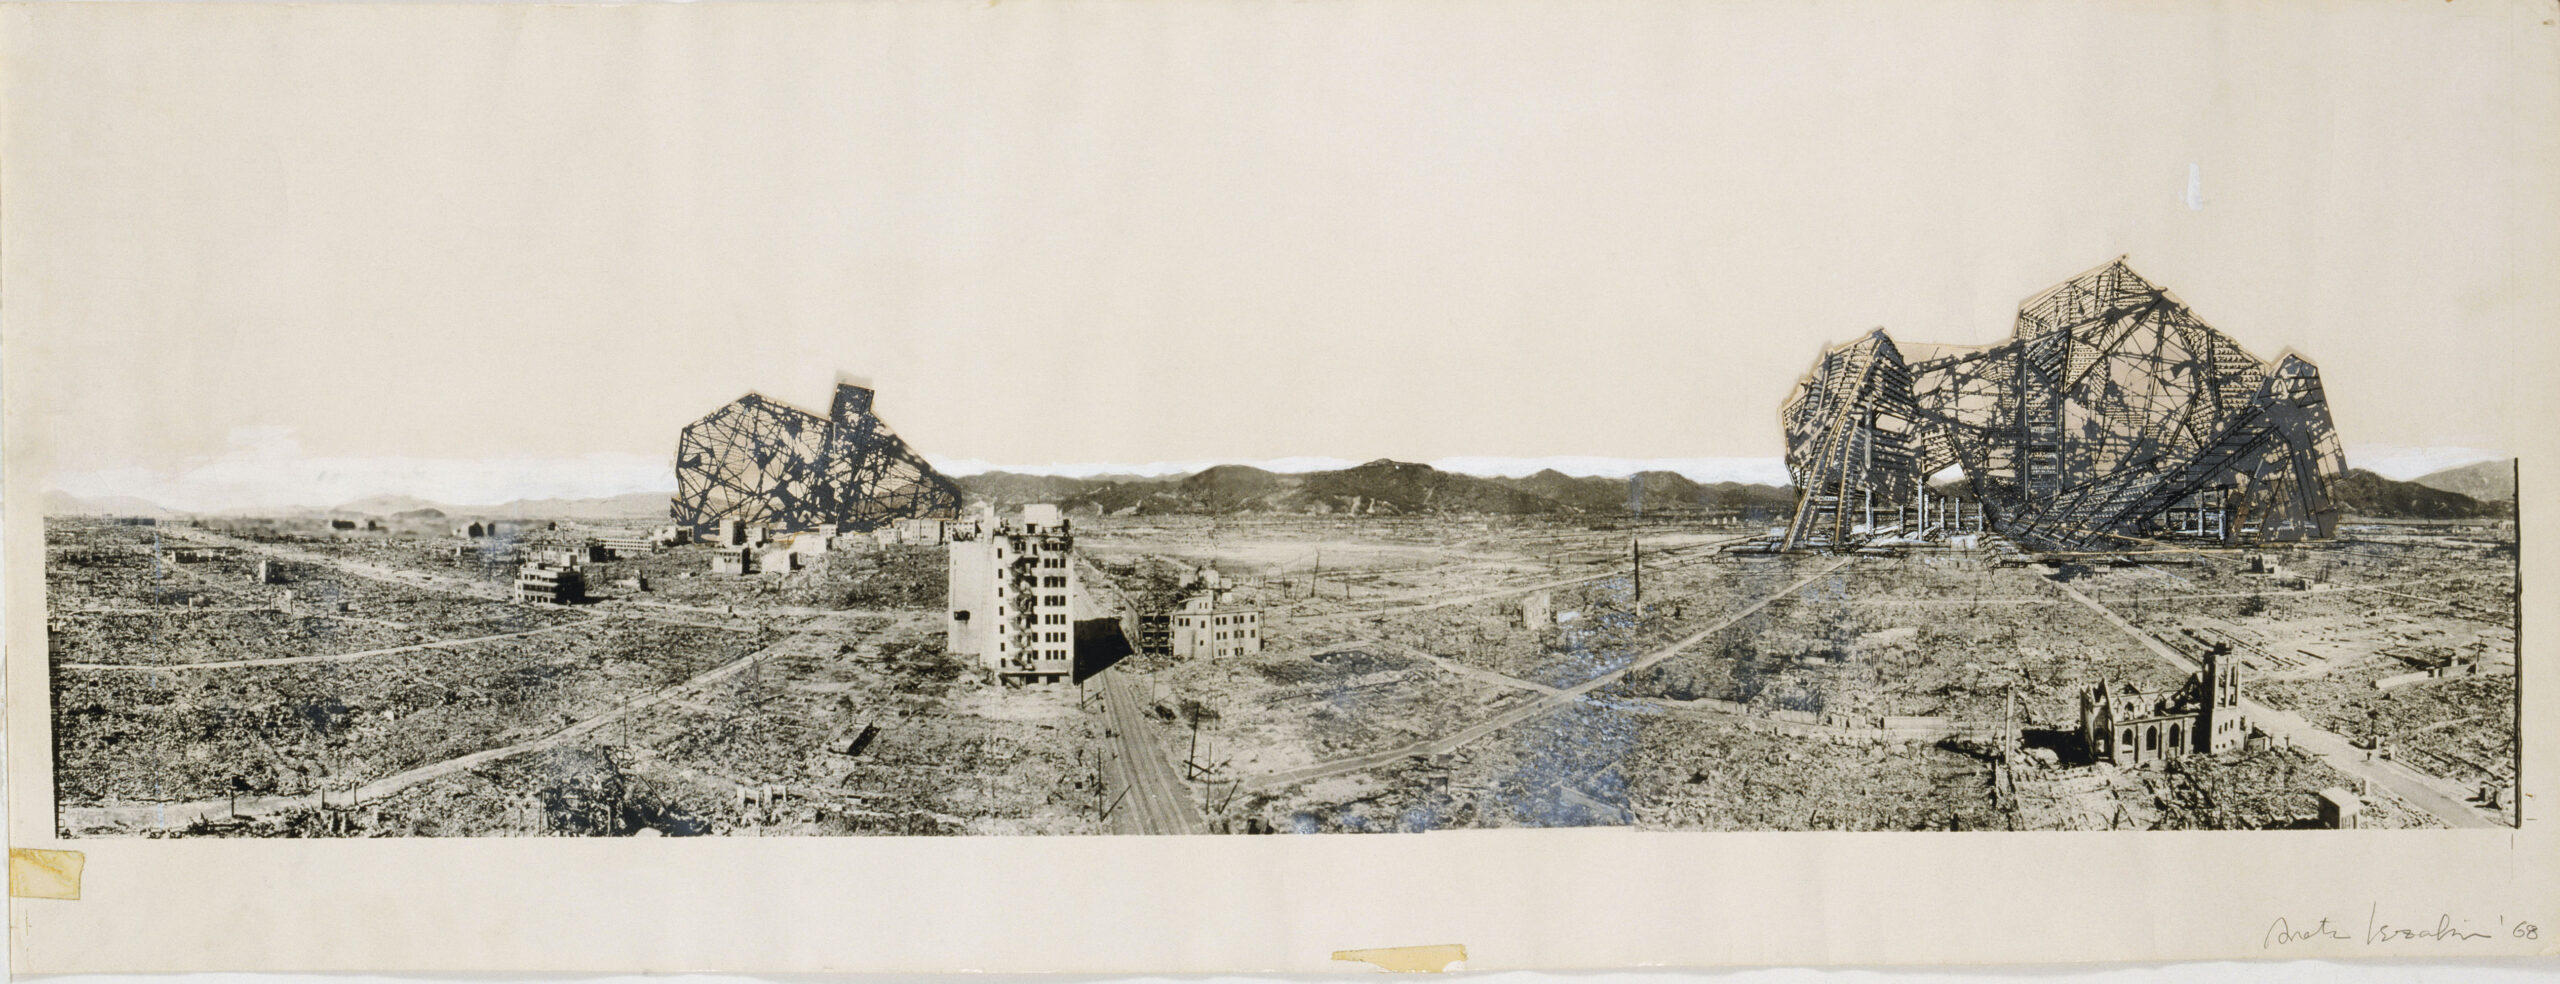 A black and white photomontage depicts a desolated Hiroshima in with but a couple of structures the artist has collaged together, breaking up the ruined cityscape rubble.